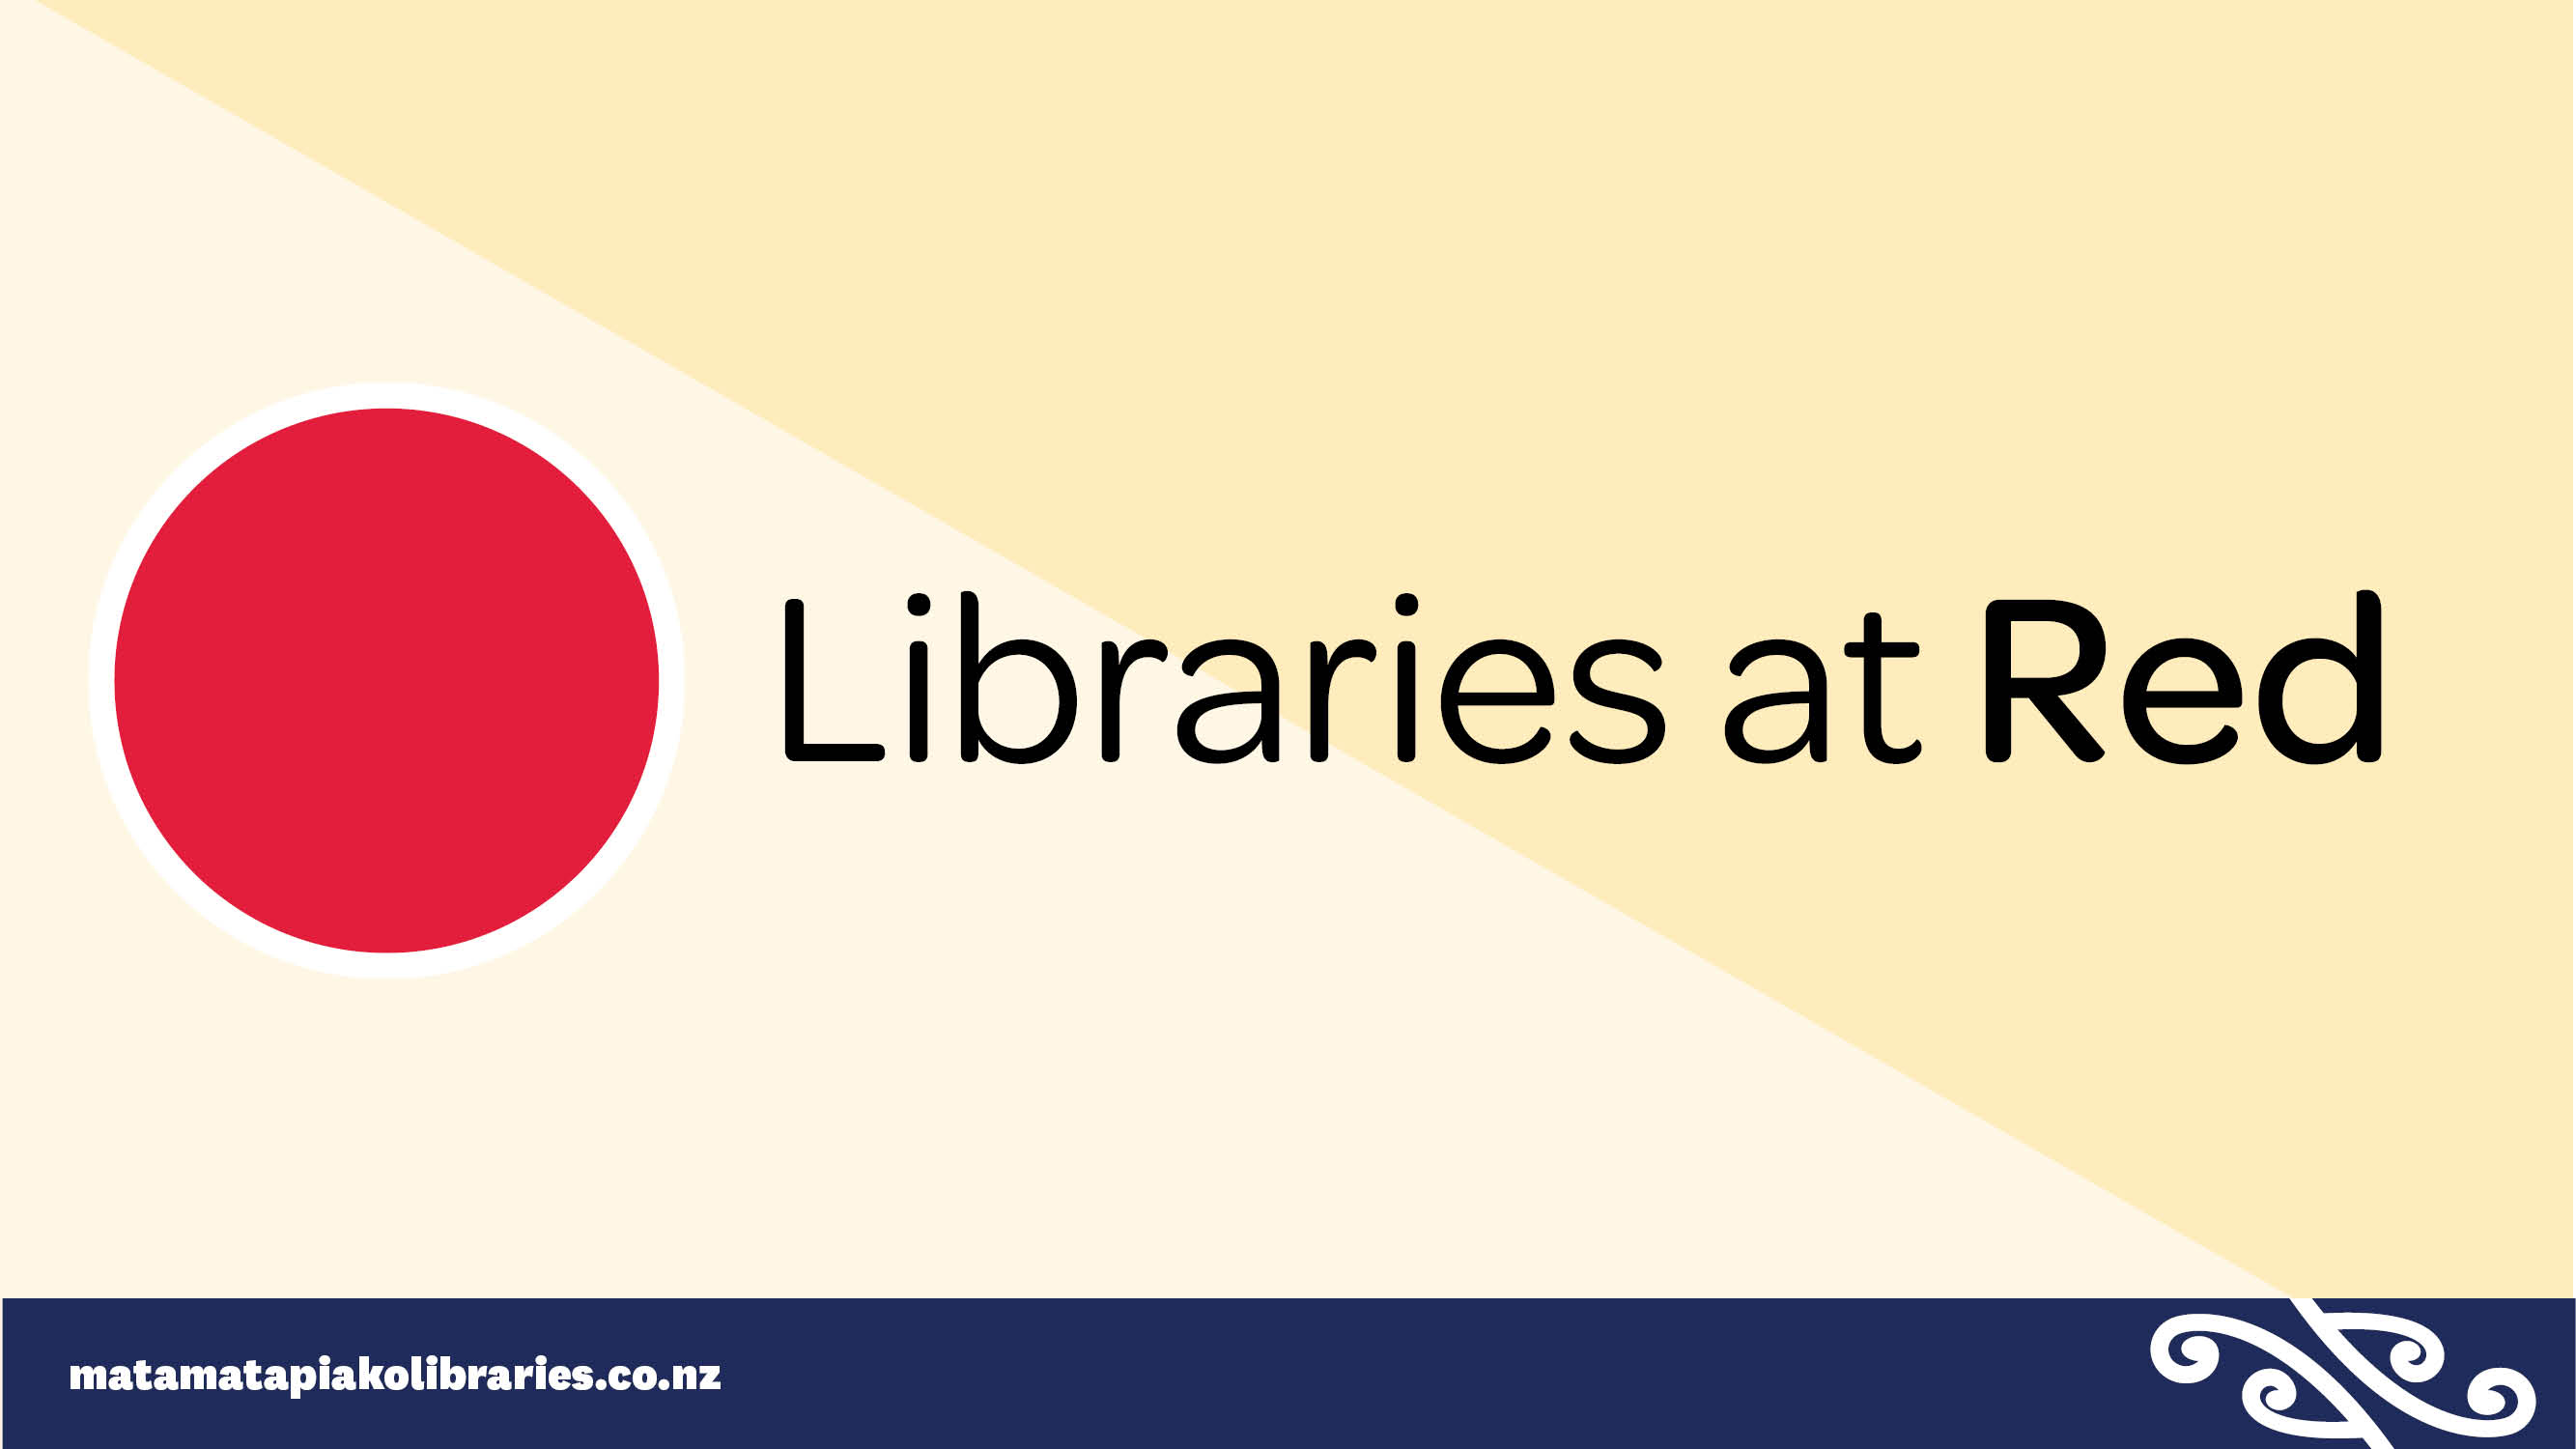 Our Libraries at Red - 28 March 2022 update